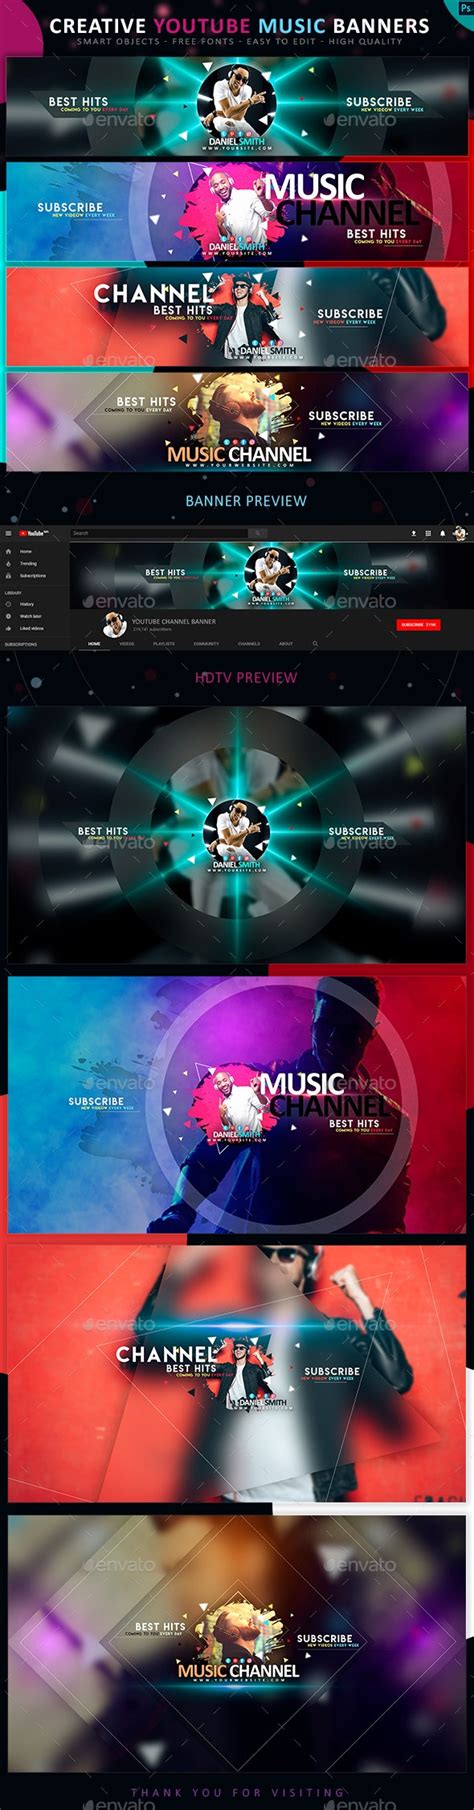 Youtube Dj And Music Banners By Blildesign Graphicriver